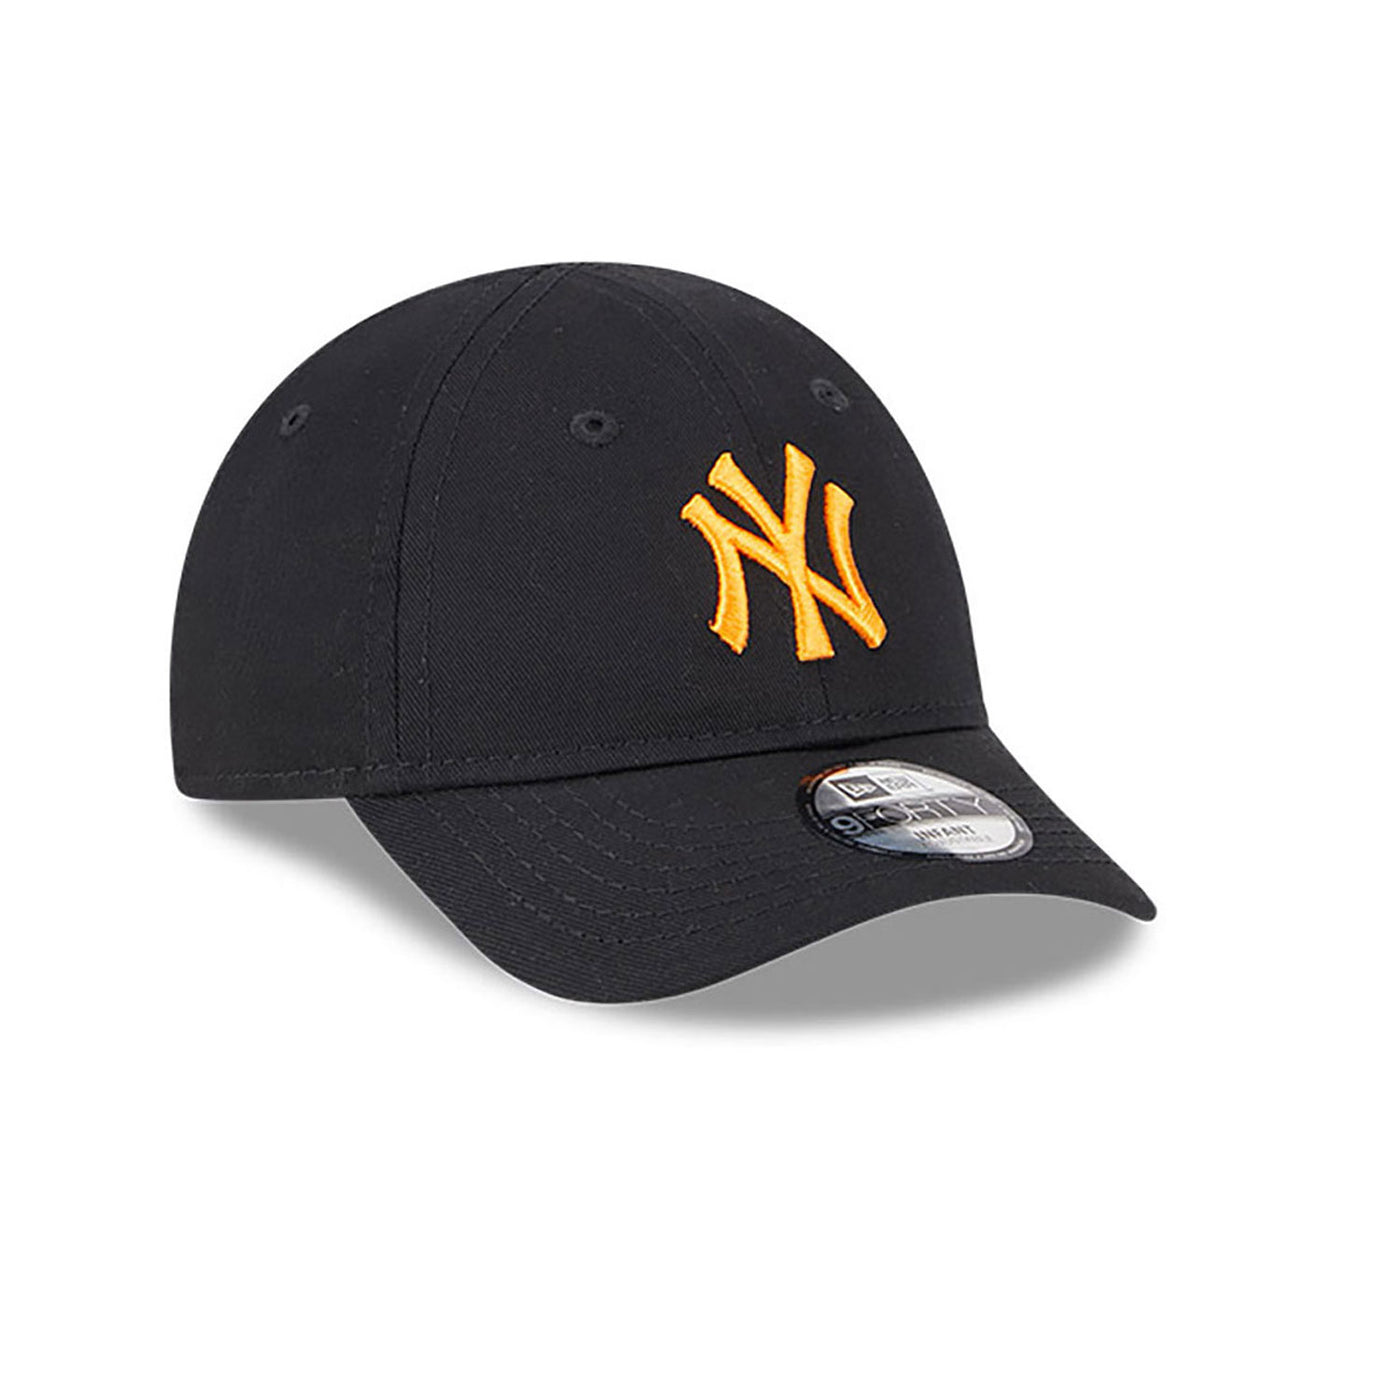 CAPPELLO 9FORTY INFANT LEAGUE ESSENTIAL NEW YORK YANKEES NEW ERA BAMBINO